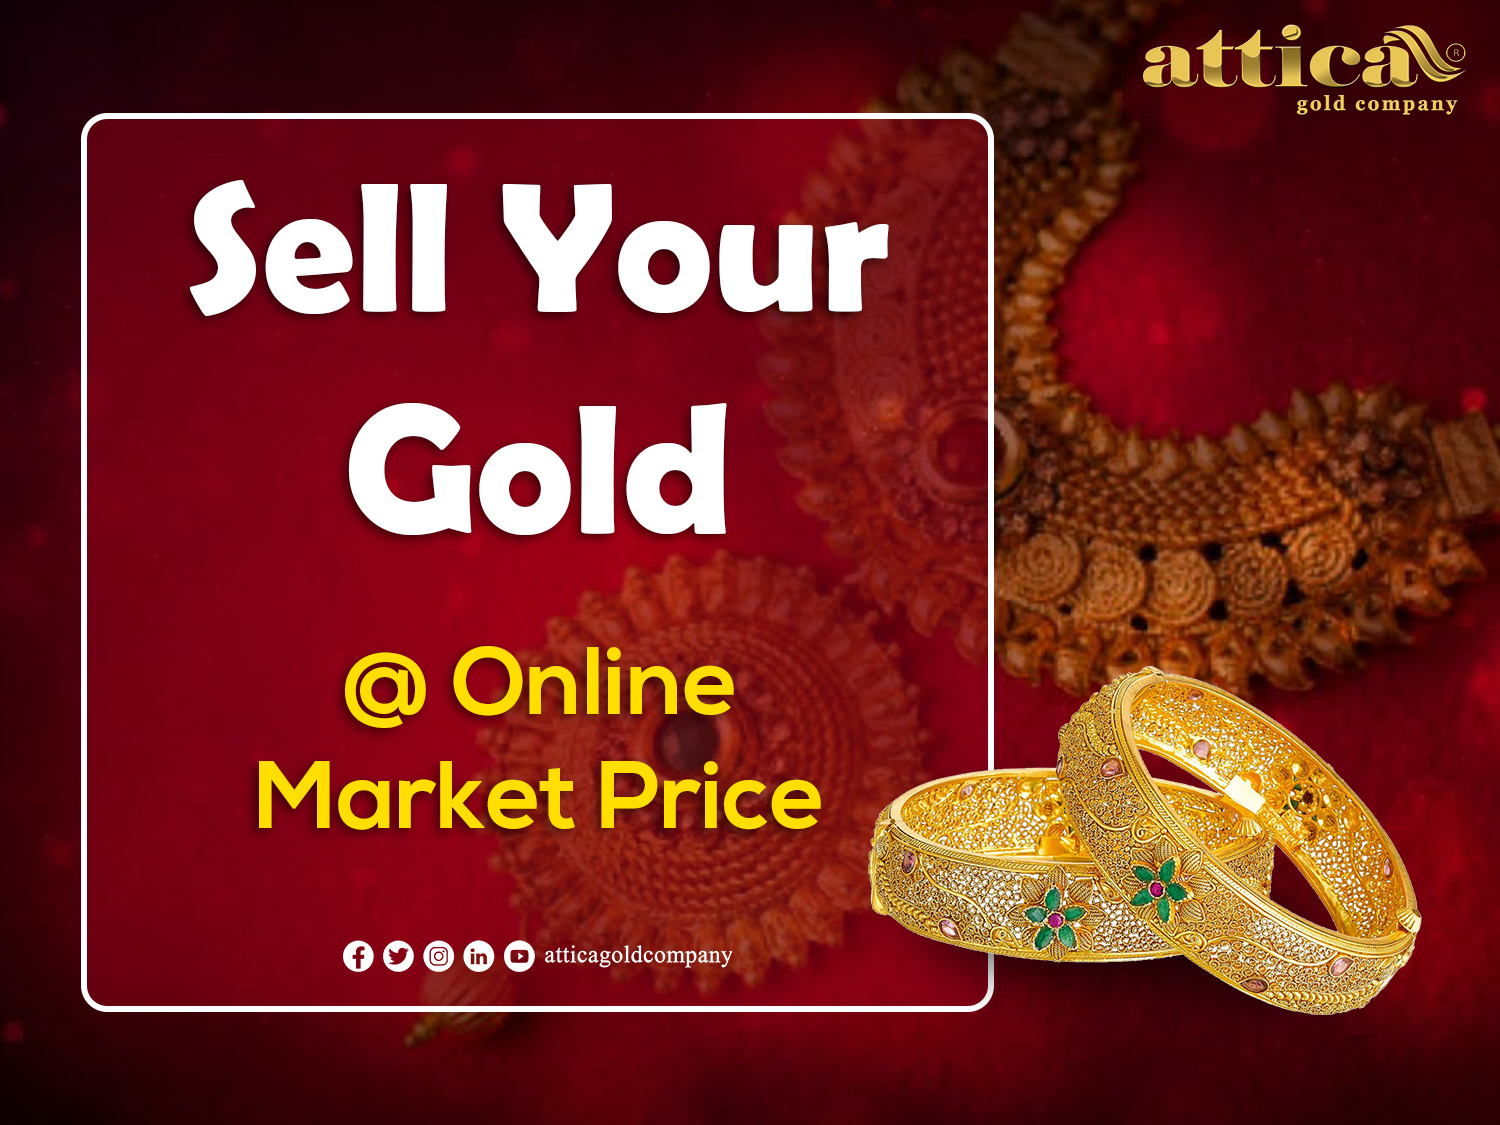 Sell Old Gold Jewellery